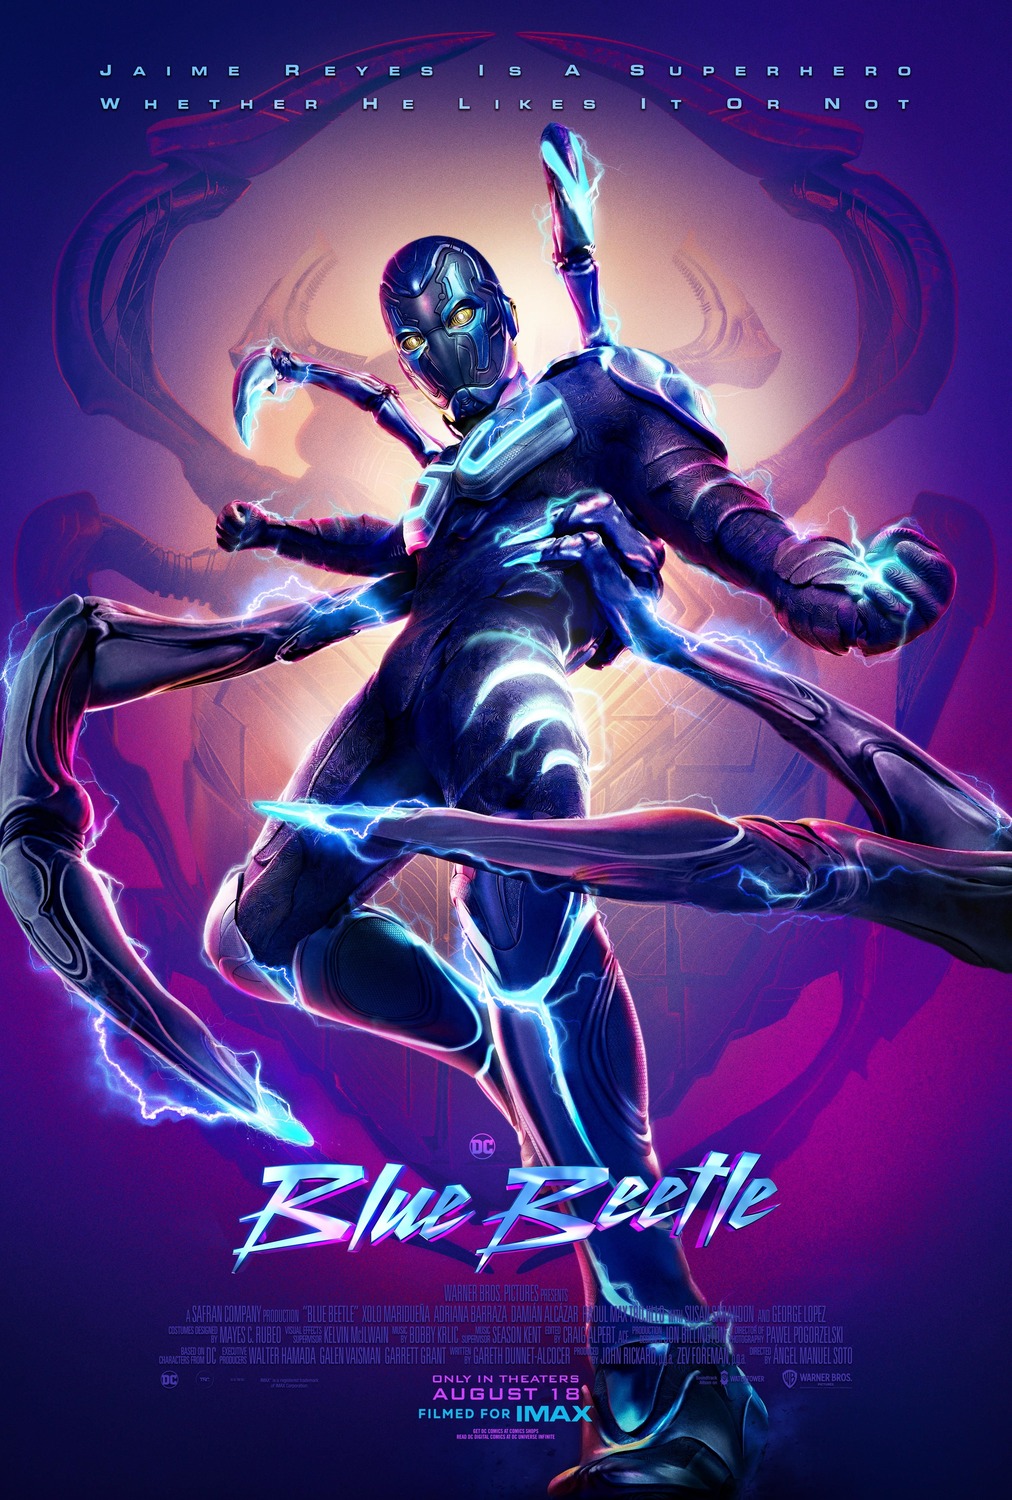 Jamie Reyes as his superhero alter-ego, the Blue Beetle, stands confidently, looking down at the viewer. The alien suit he's wearing has several beetle-like appendages which fill the frame.